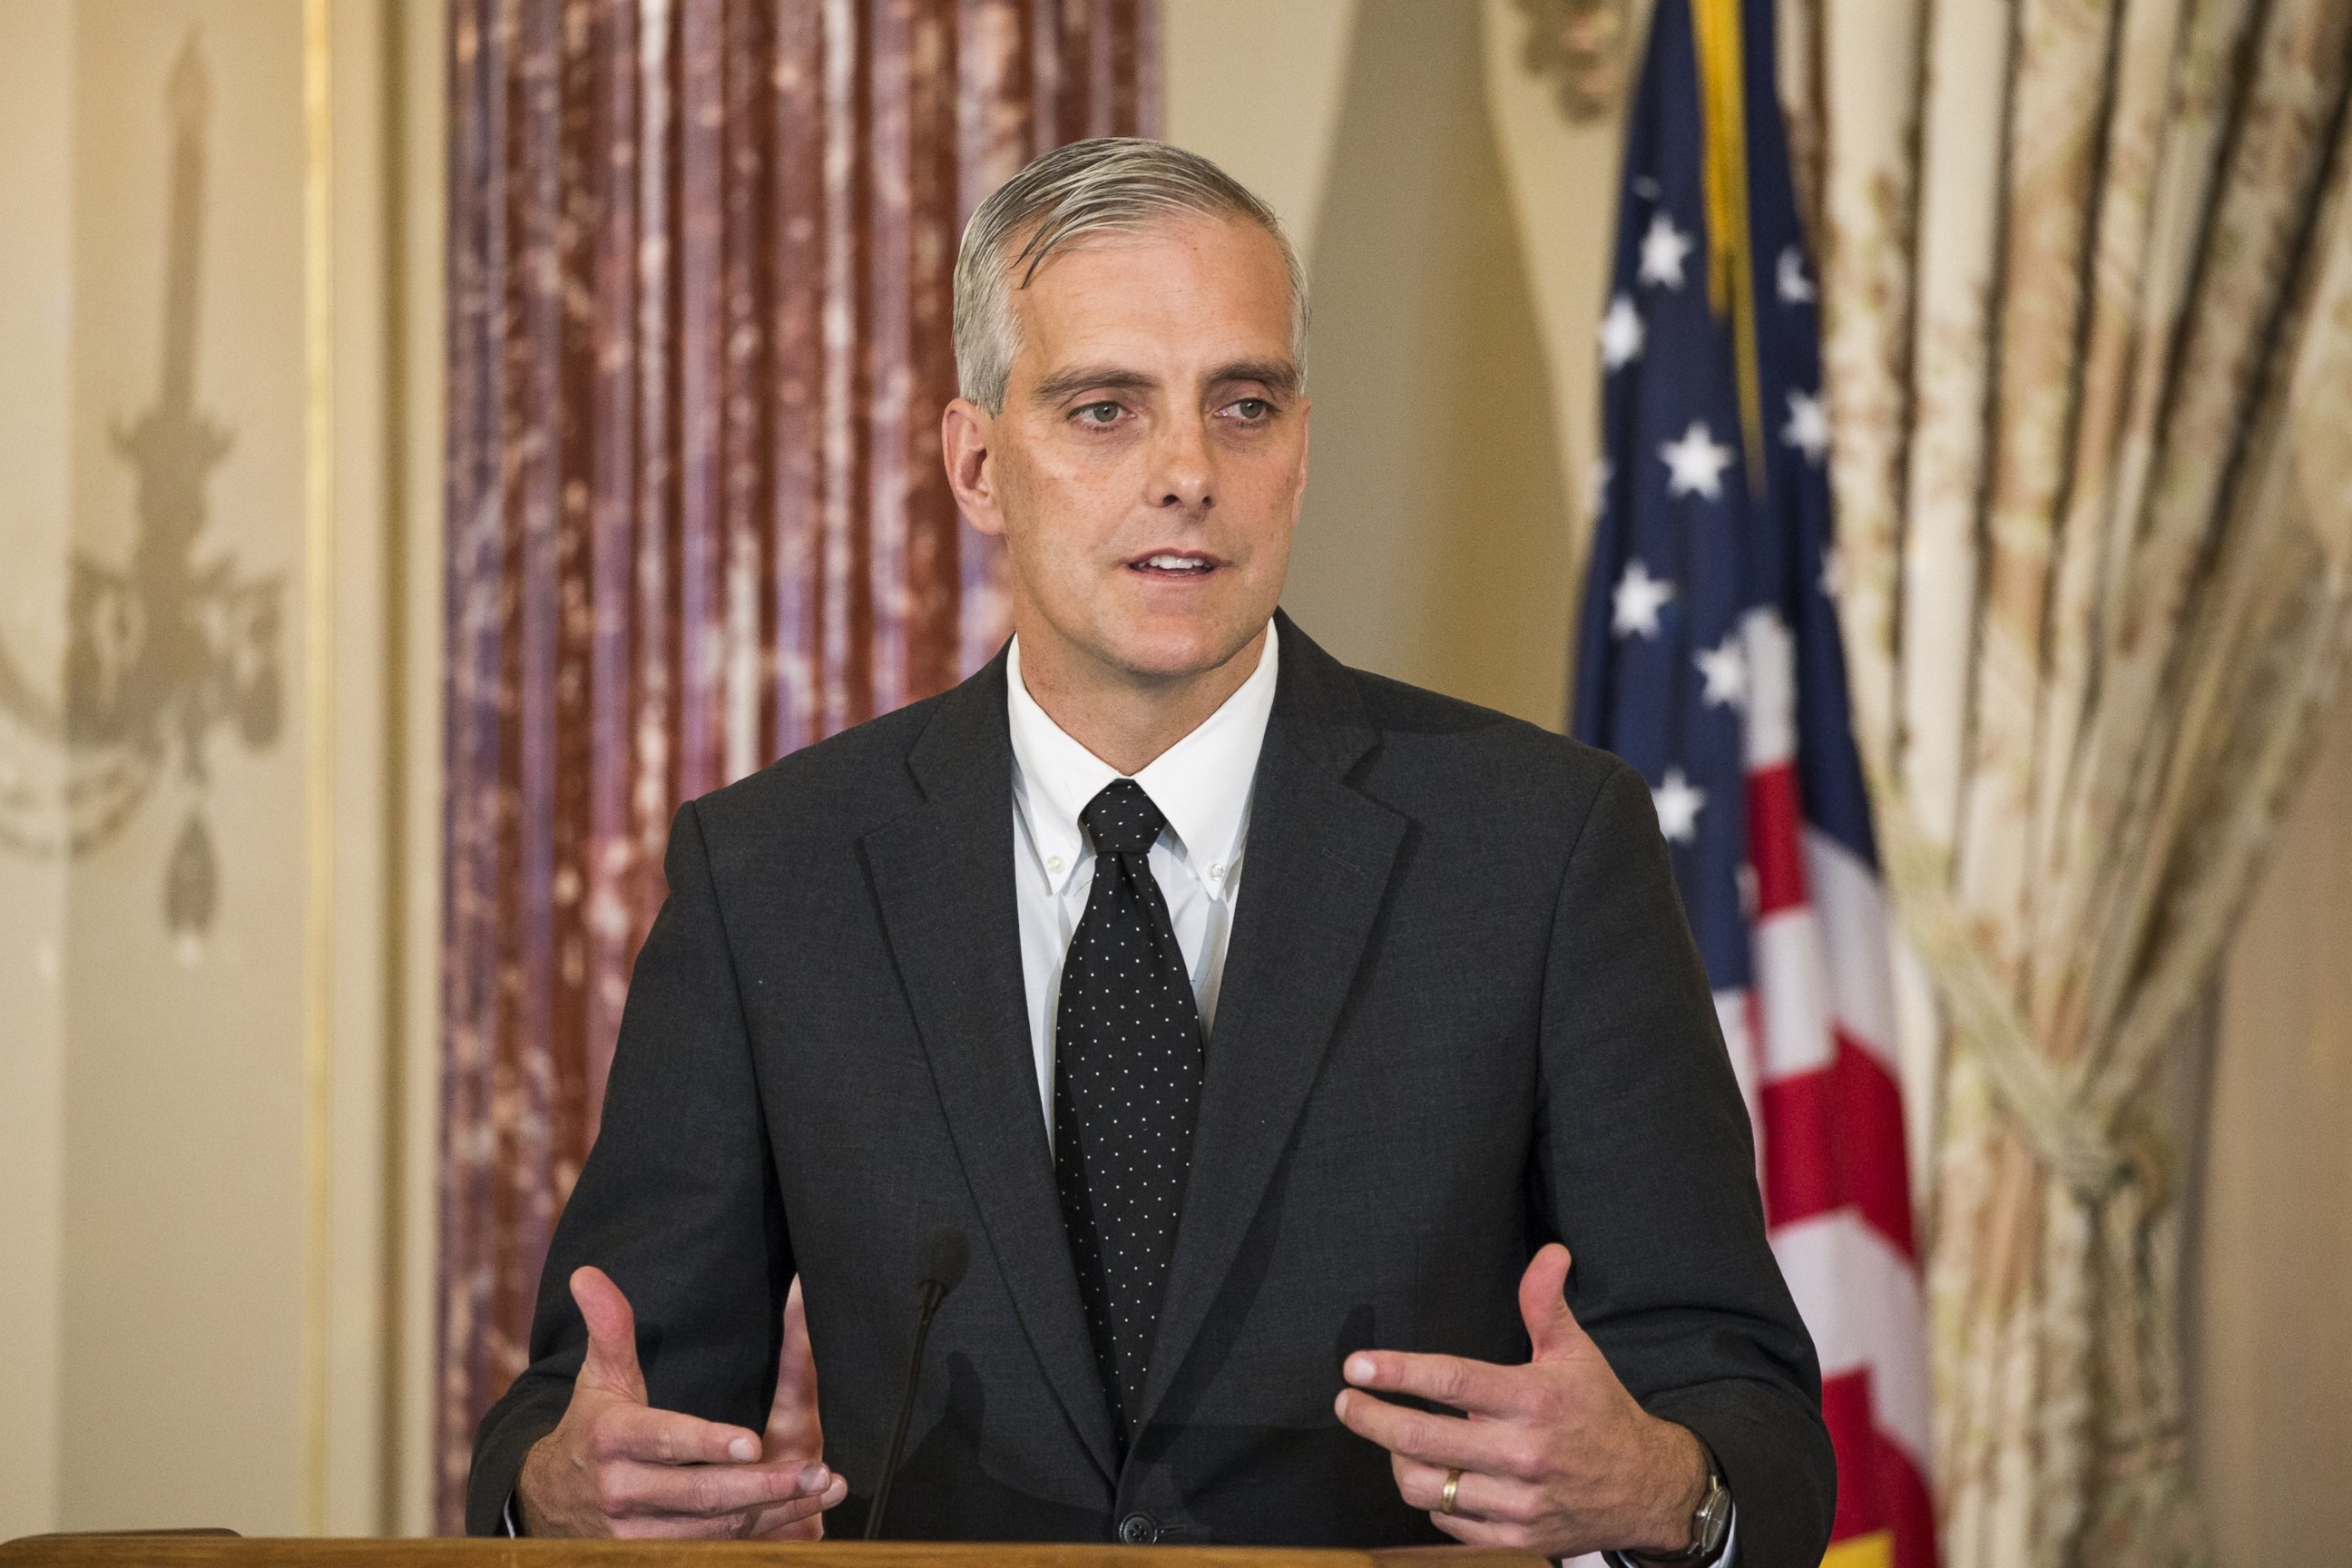 PHOTO: White House Chief of Staff Denis McDonough speaks during an event at the Department of State in Washington, Nov. 16, 2015.